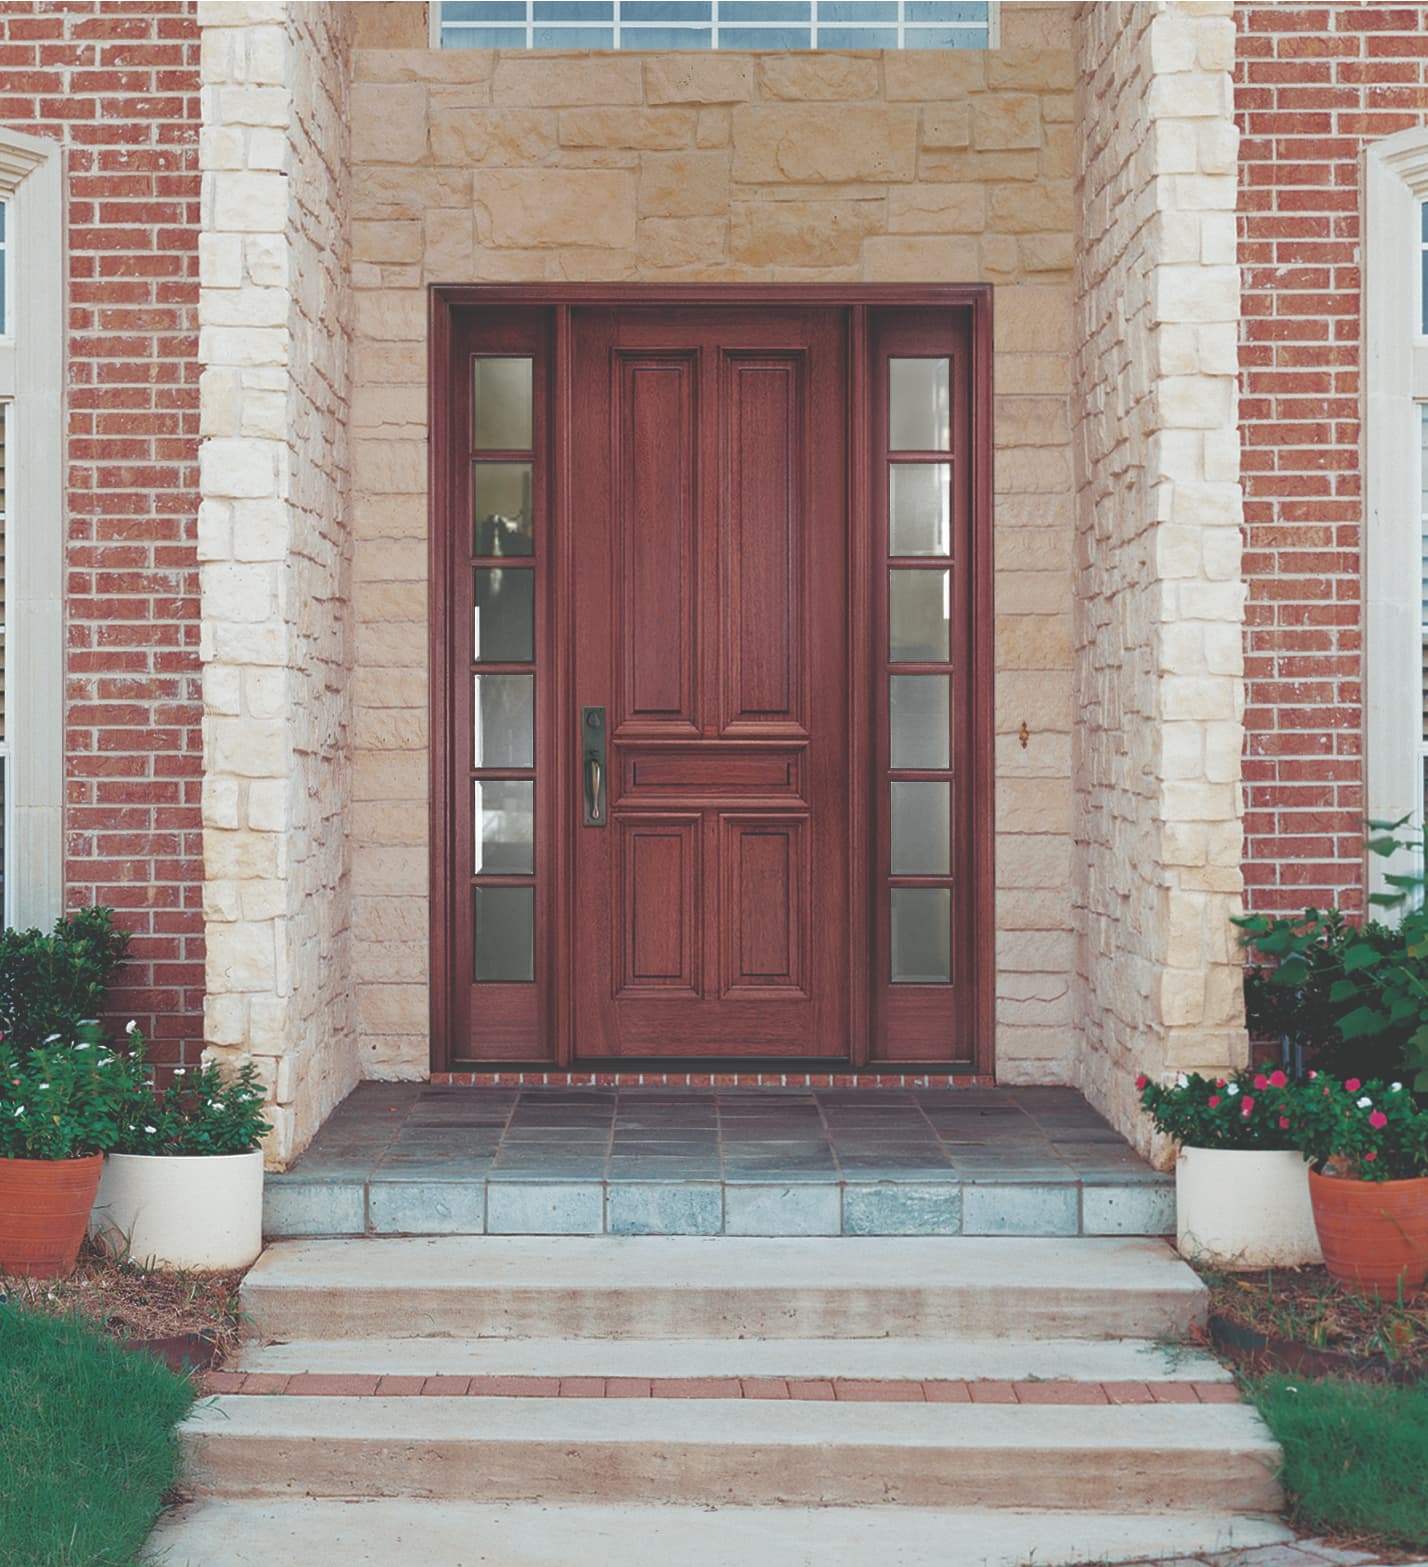 Solid Wood Door With Sidelights Contrast Entry's Stonework Pella